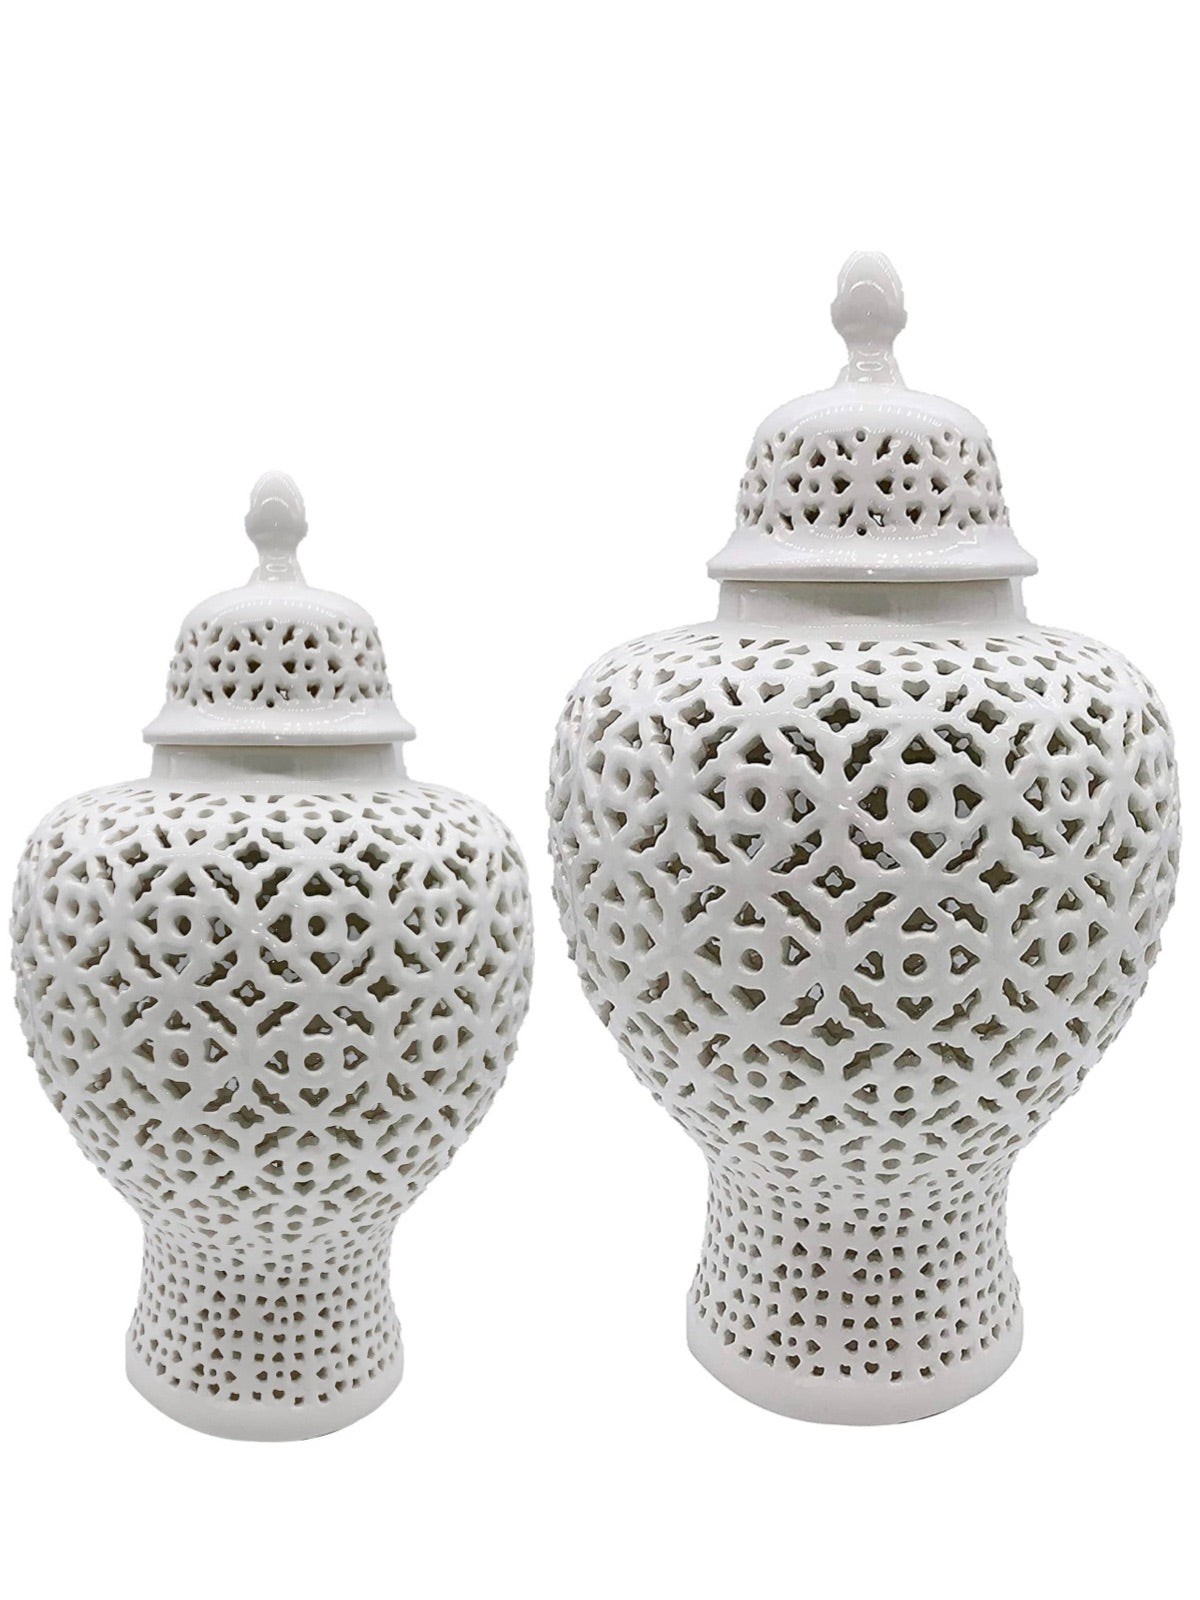 White Ceramic Ginger Jar with an elegant pierced design and lid. Available in 2 sizes